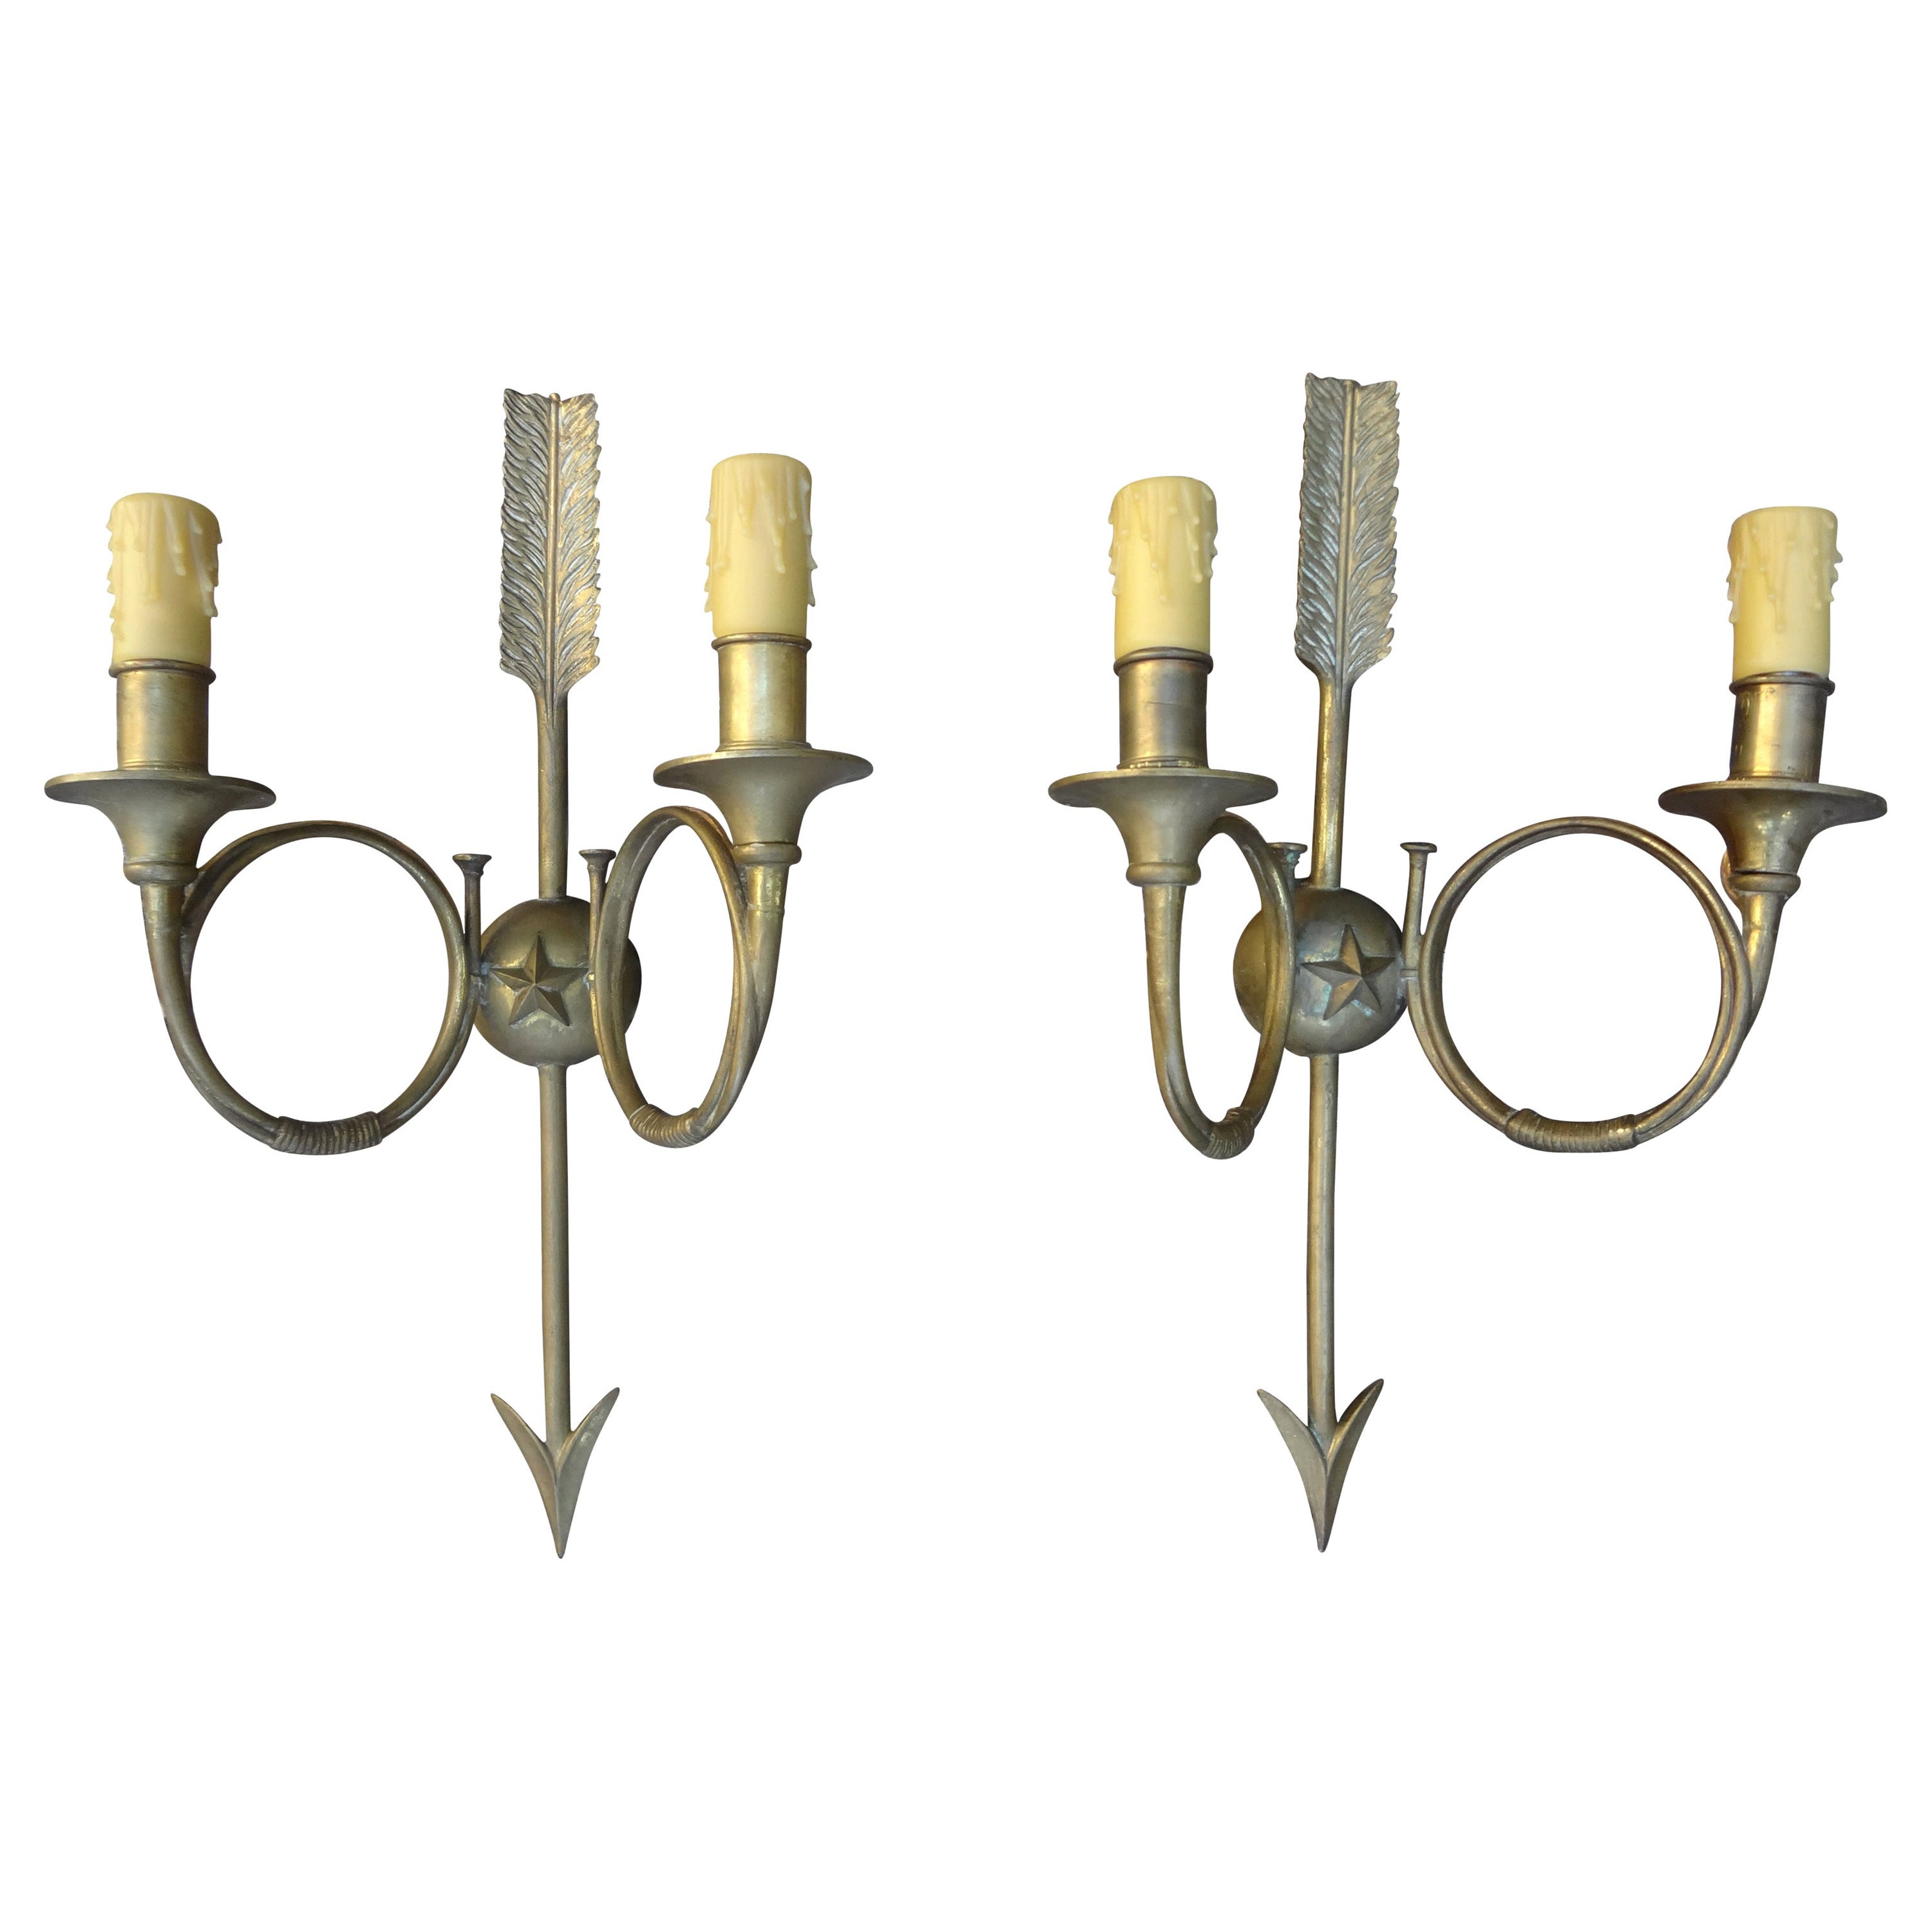 French, Maison Bagues Style Bronze Neoclassical Sconces